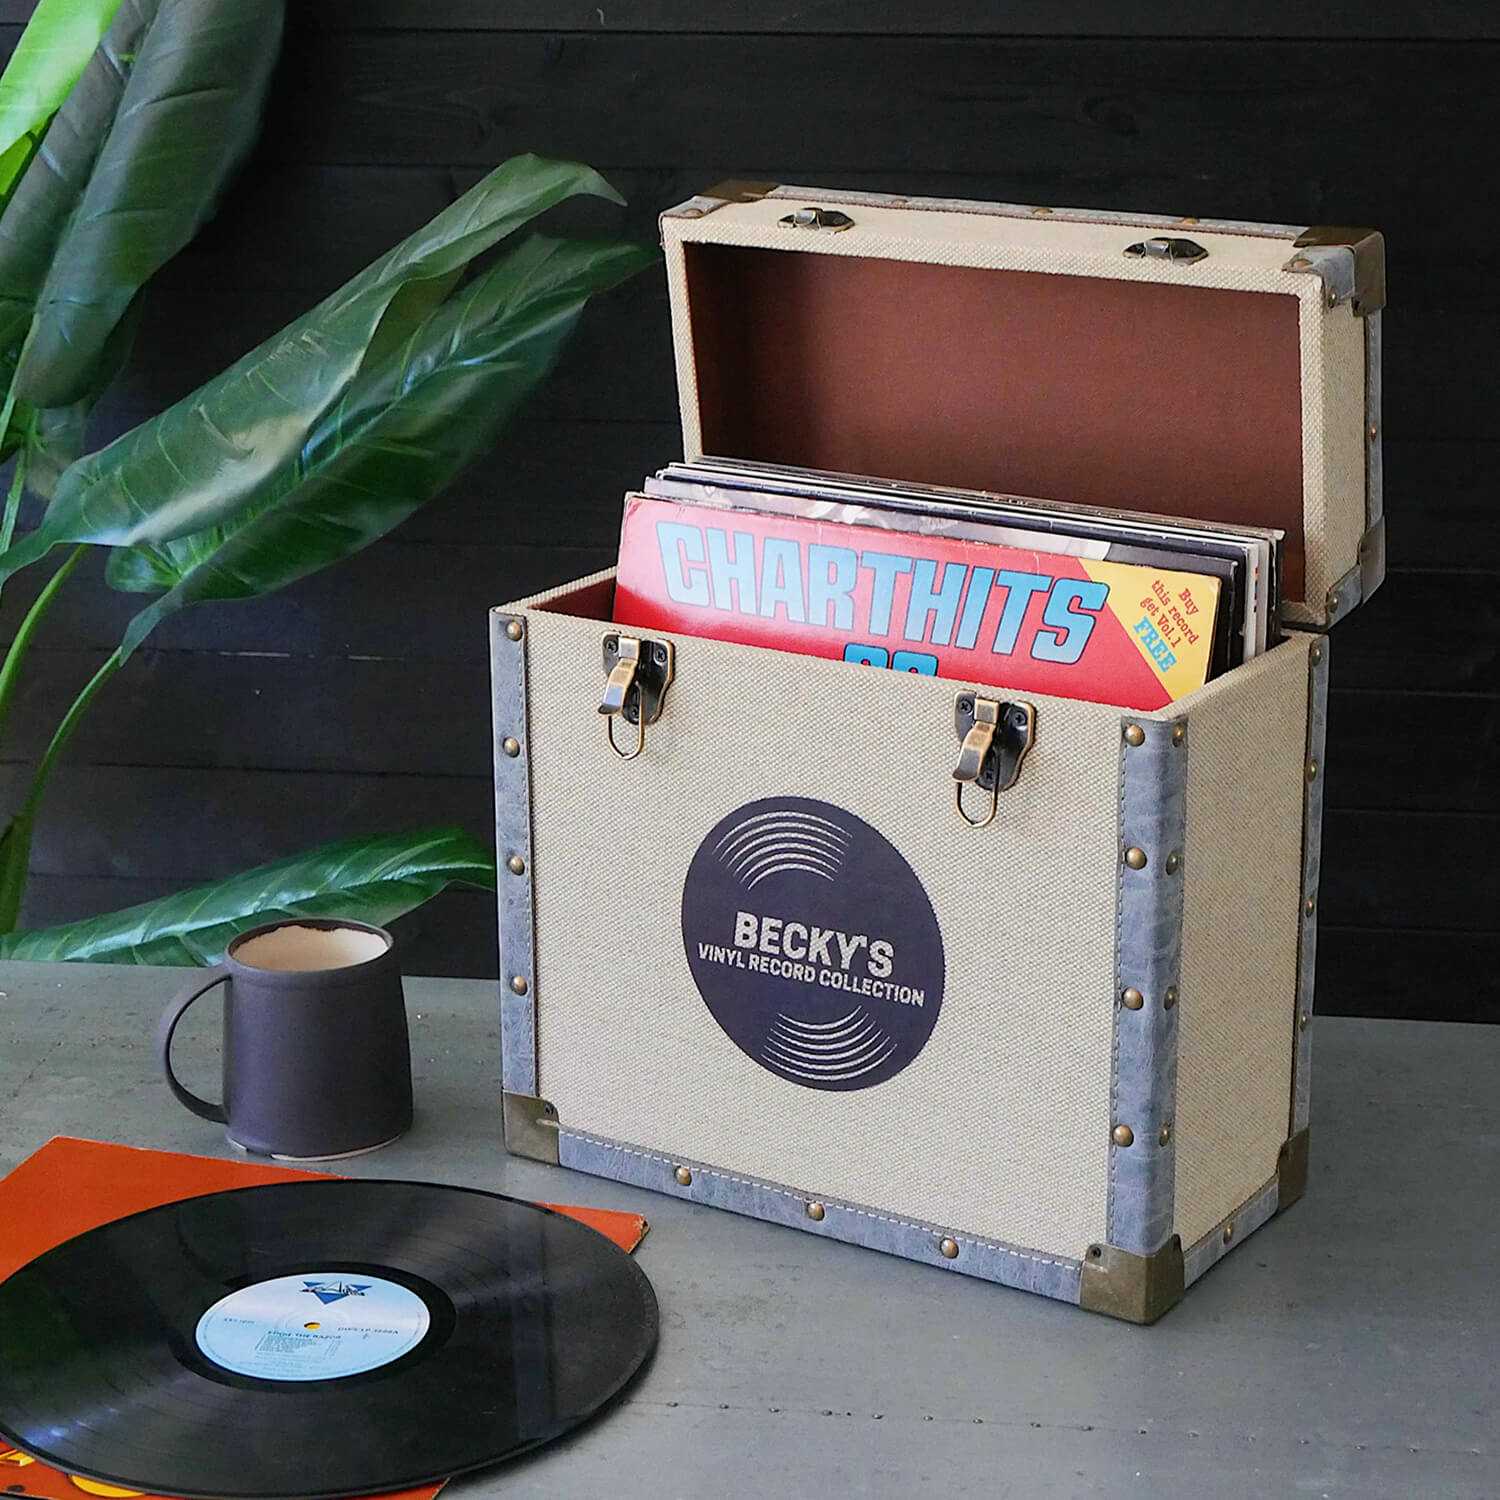 Review: Best Record Storage Box for Organized Vinyl Collection